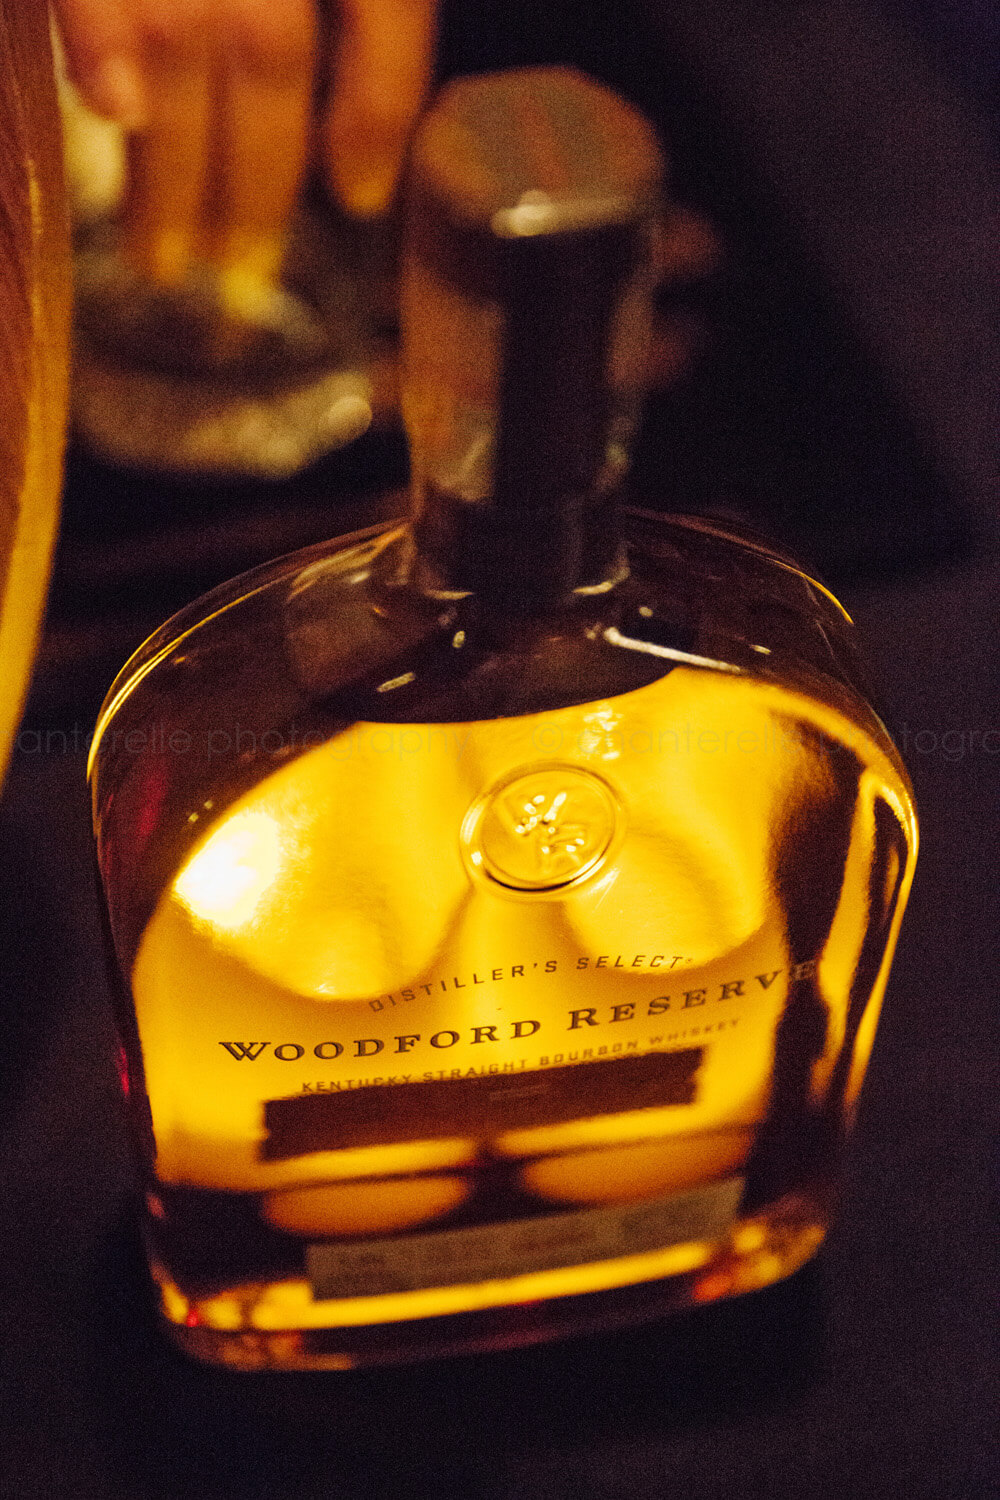 woodford reserve bourbon at iacp louisville conference